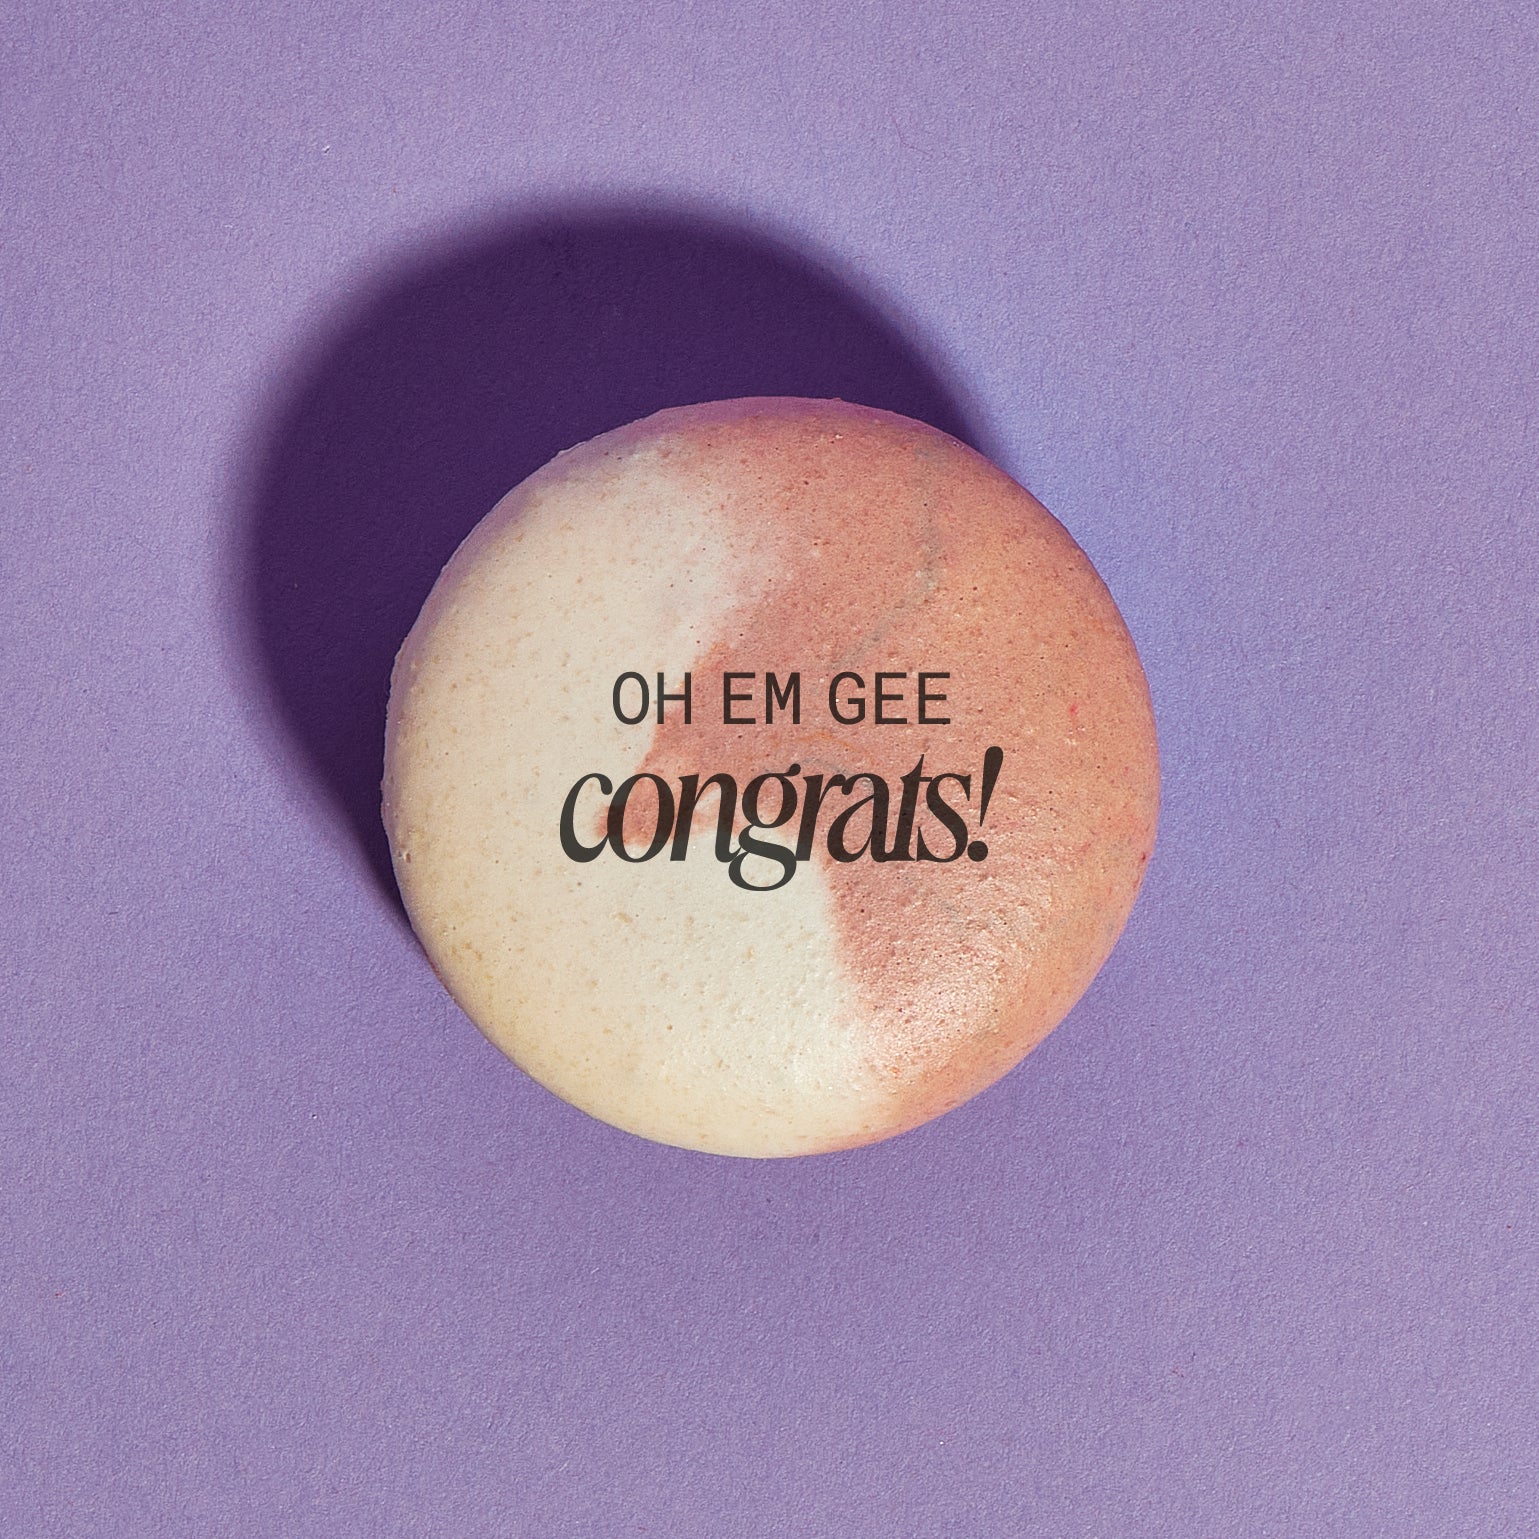 Overhead shot of a brown and white swirled macaron with the words "OH EM GEE Congrats!" printed on the shell in black ink. The macaron is placed on a purple backdrop.